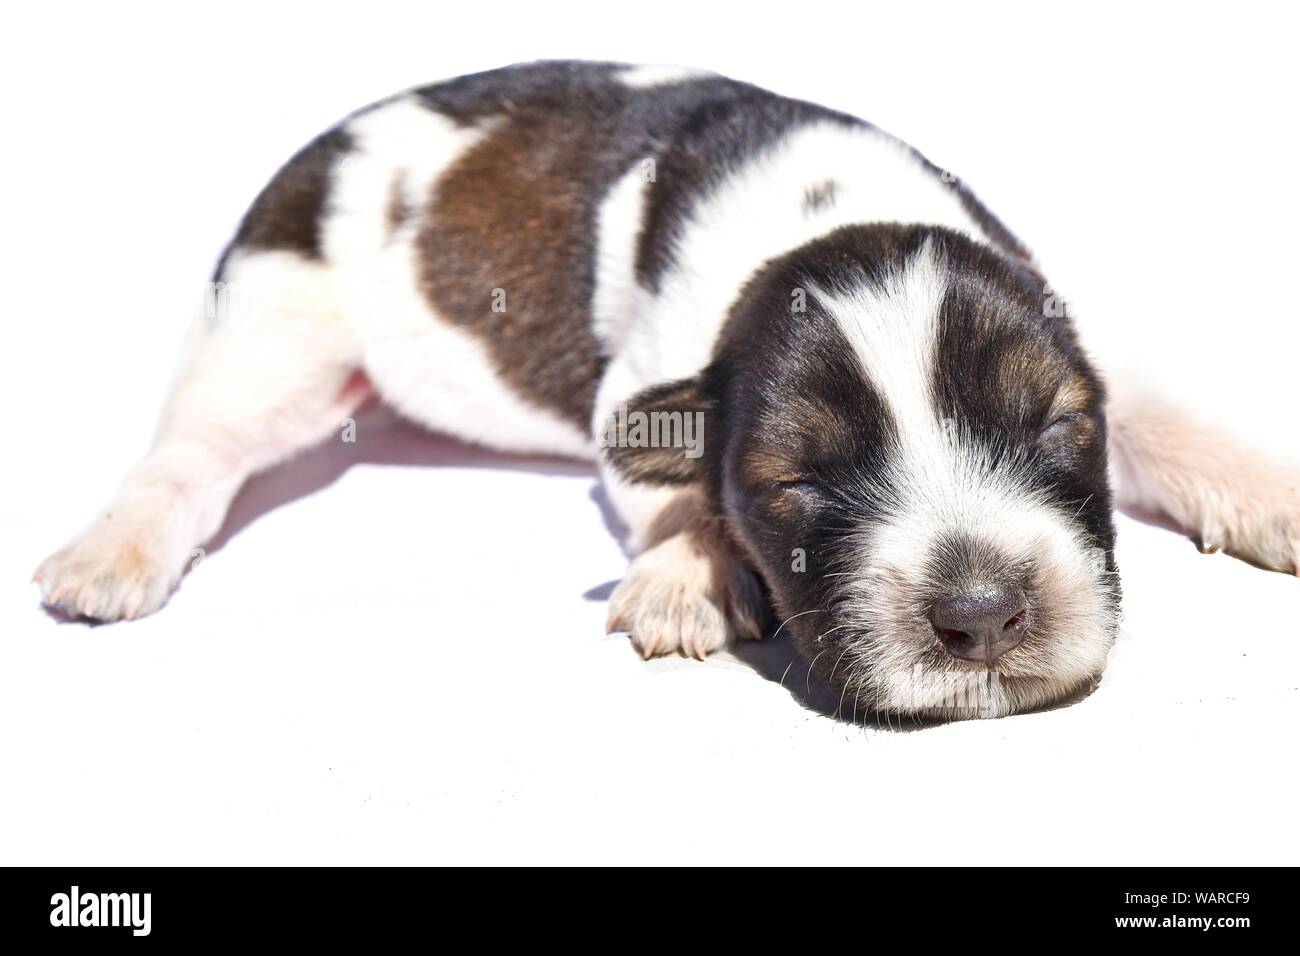 Newborn Spotted Dog isolated on white background, Dark brown and white striped puppy, Baby pet Stock Photo